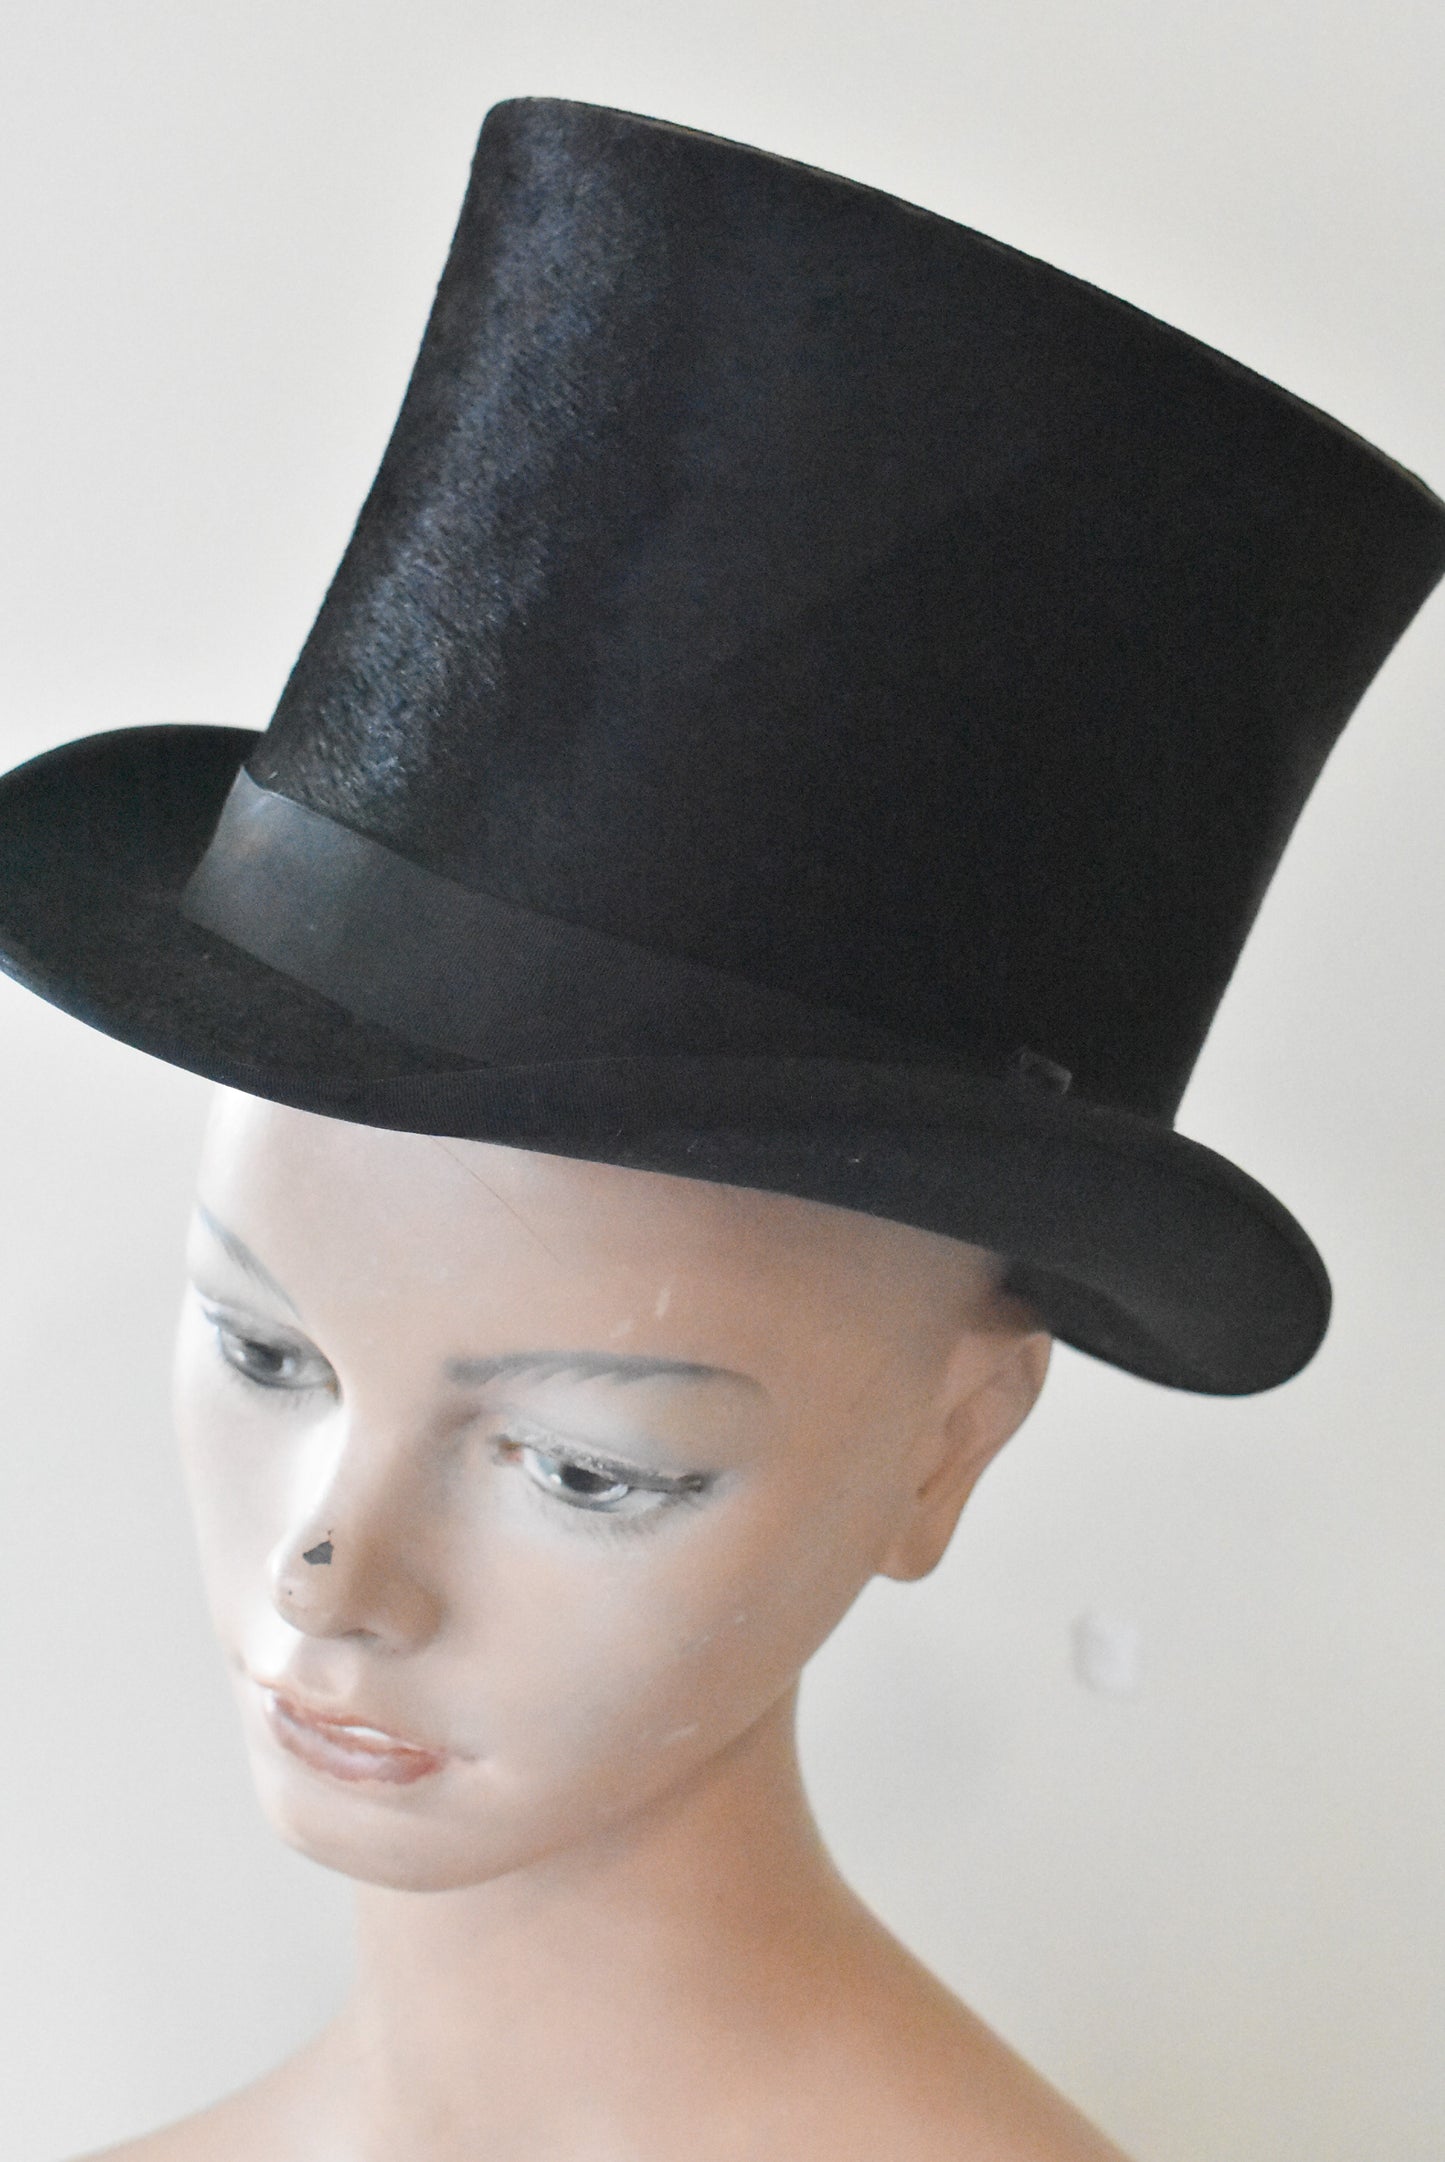 Sargood, Son and Ewen Dunedin, by royal appointment, antique 1800's beaver top hat